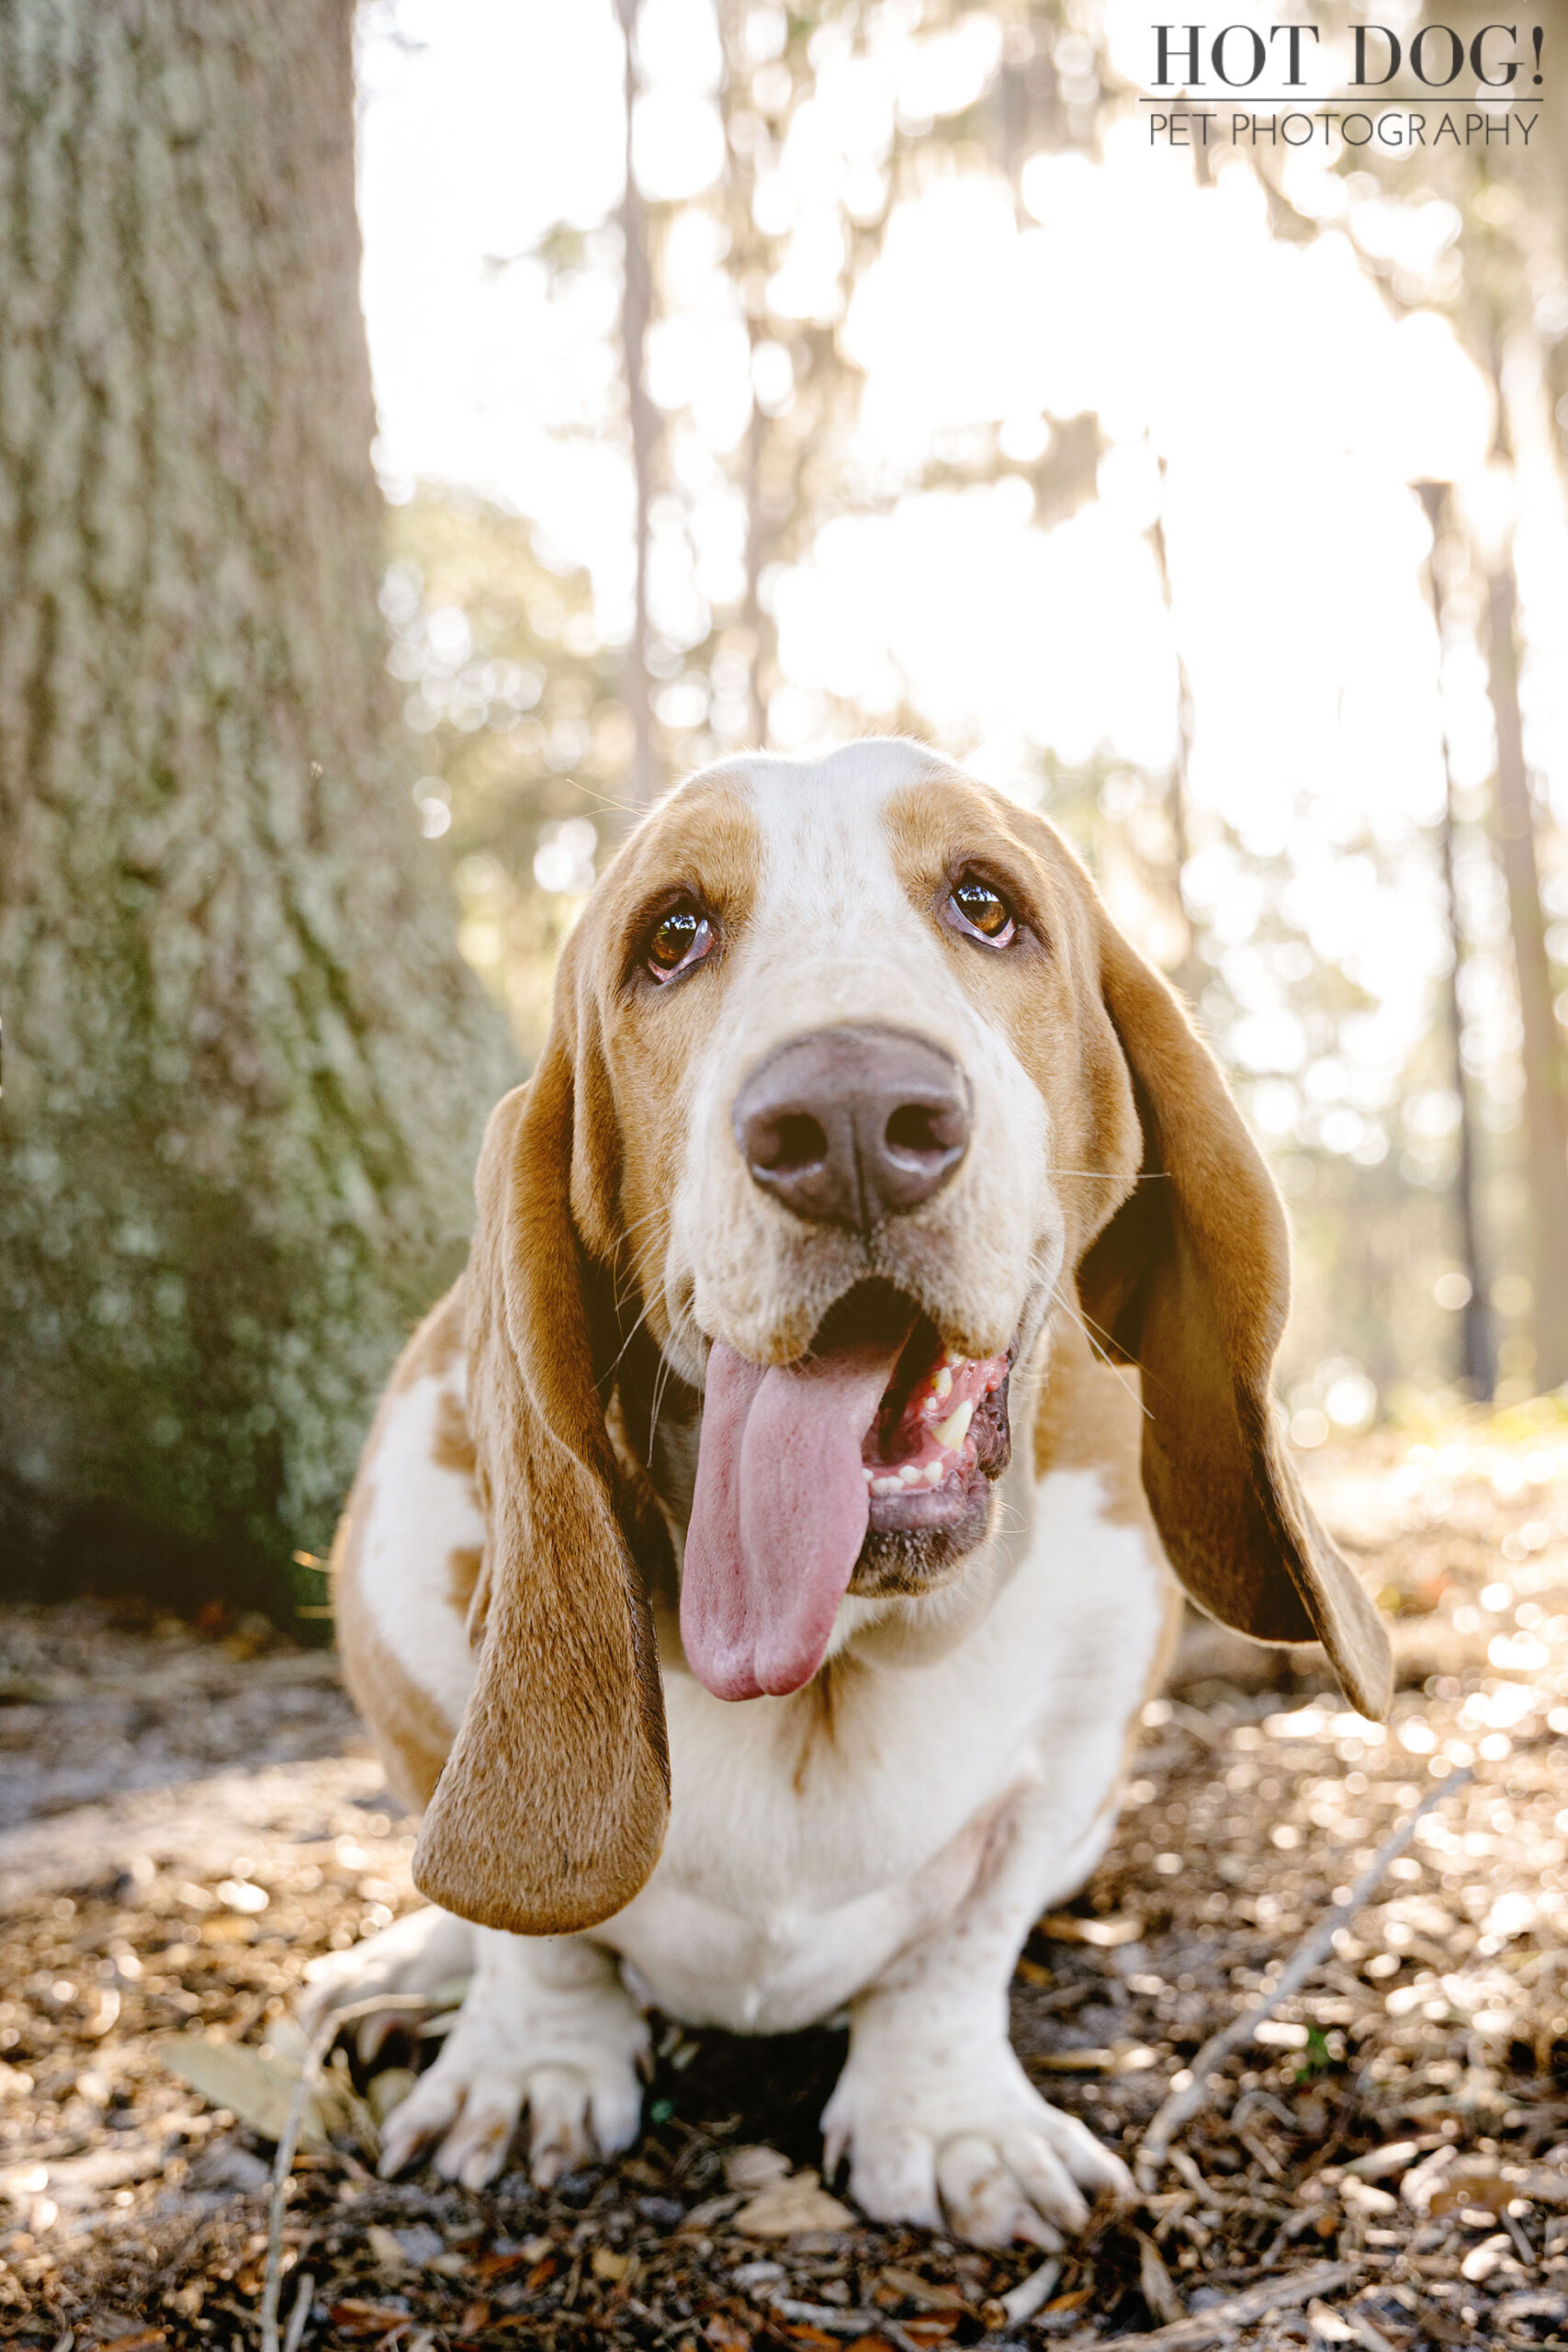 Basset hounds are photographed in Orlando, Florida by Tom and Erika Pitera of Hot Dog! Pet Photography.